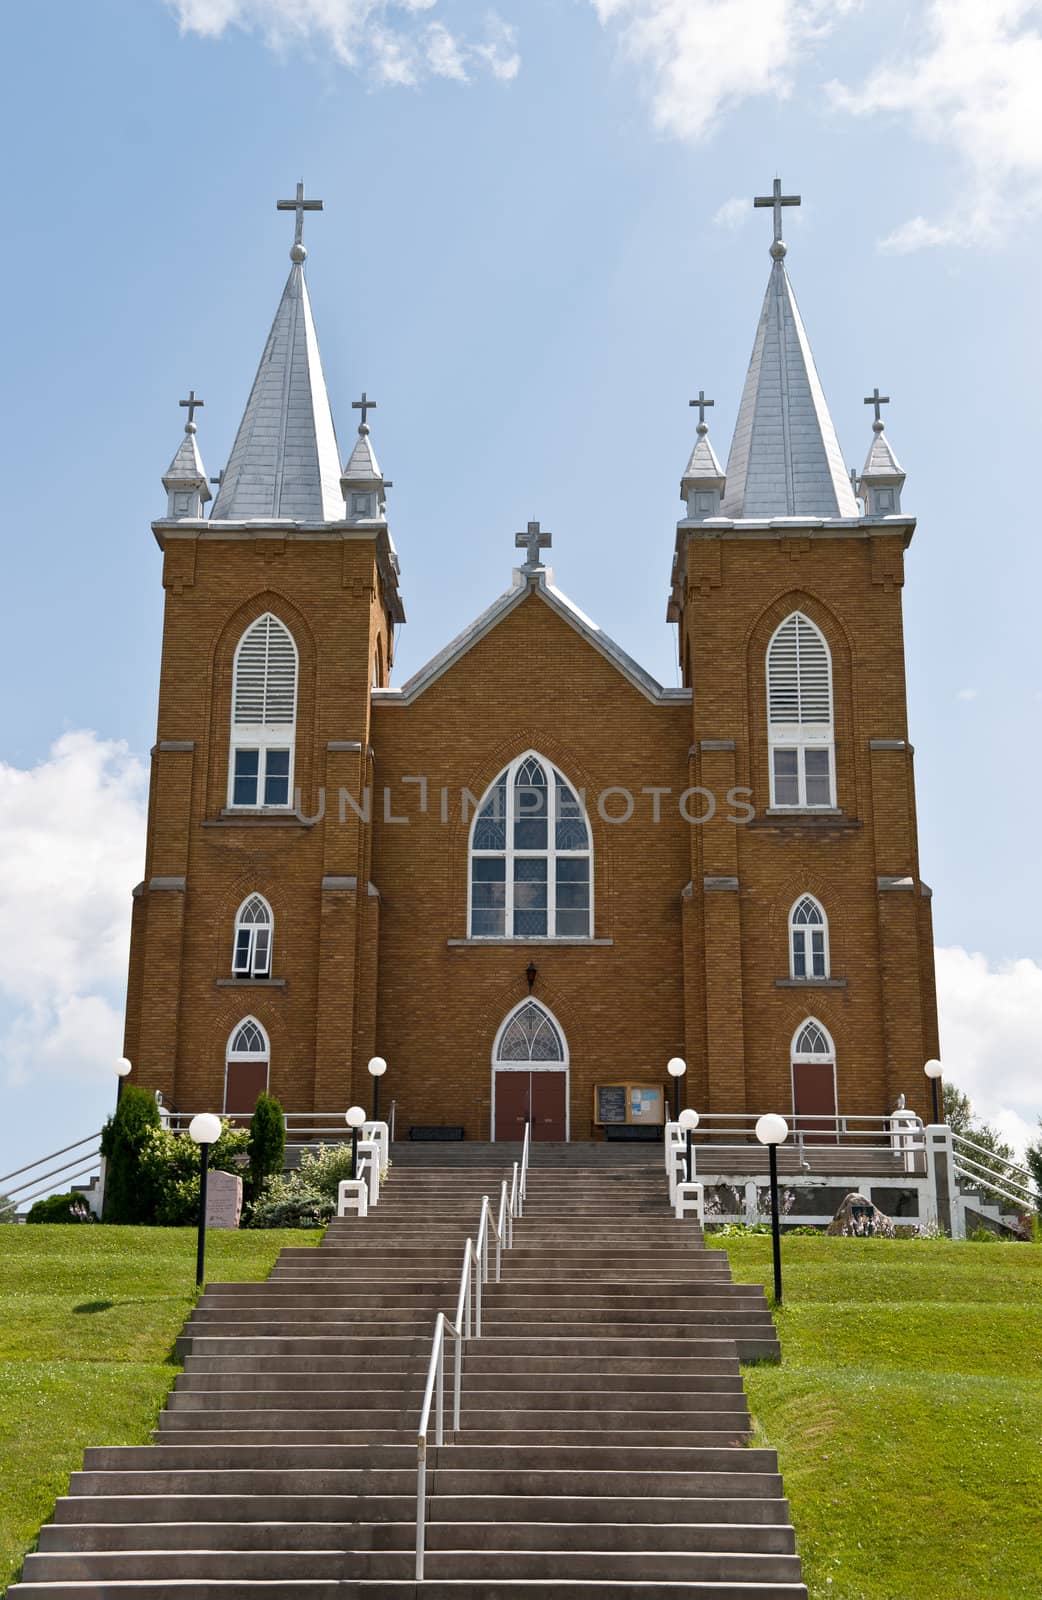 St. Mary's church in Wilno Ontario Canad by Marcus